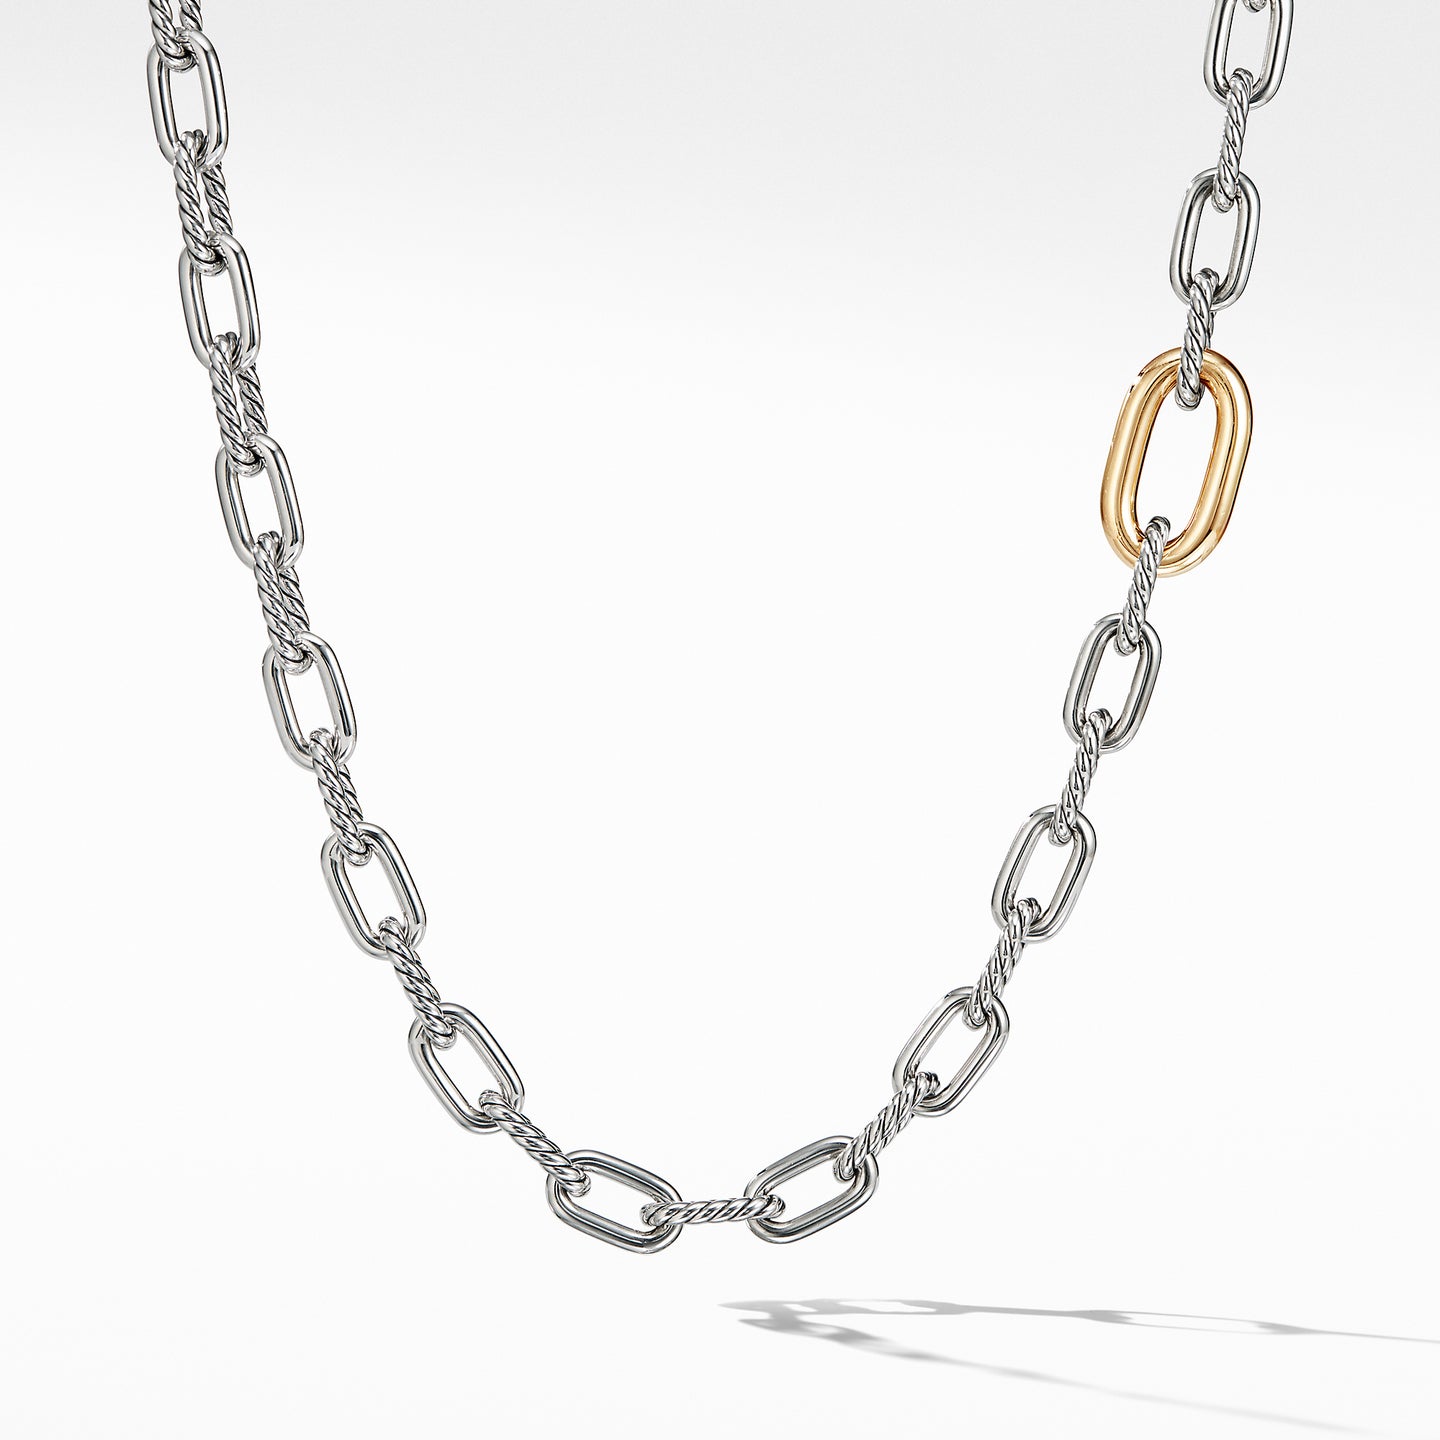 DY Madison® Convertible Chain Link Necklace with 18K Yellow Gold, 36.25